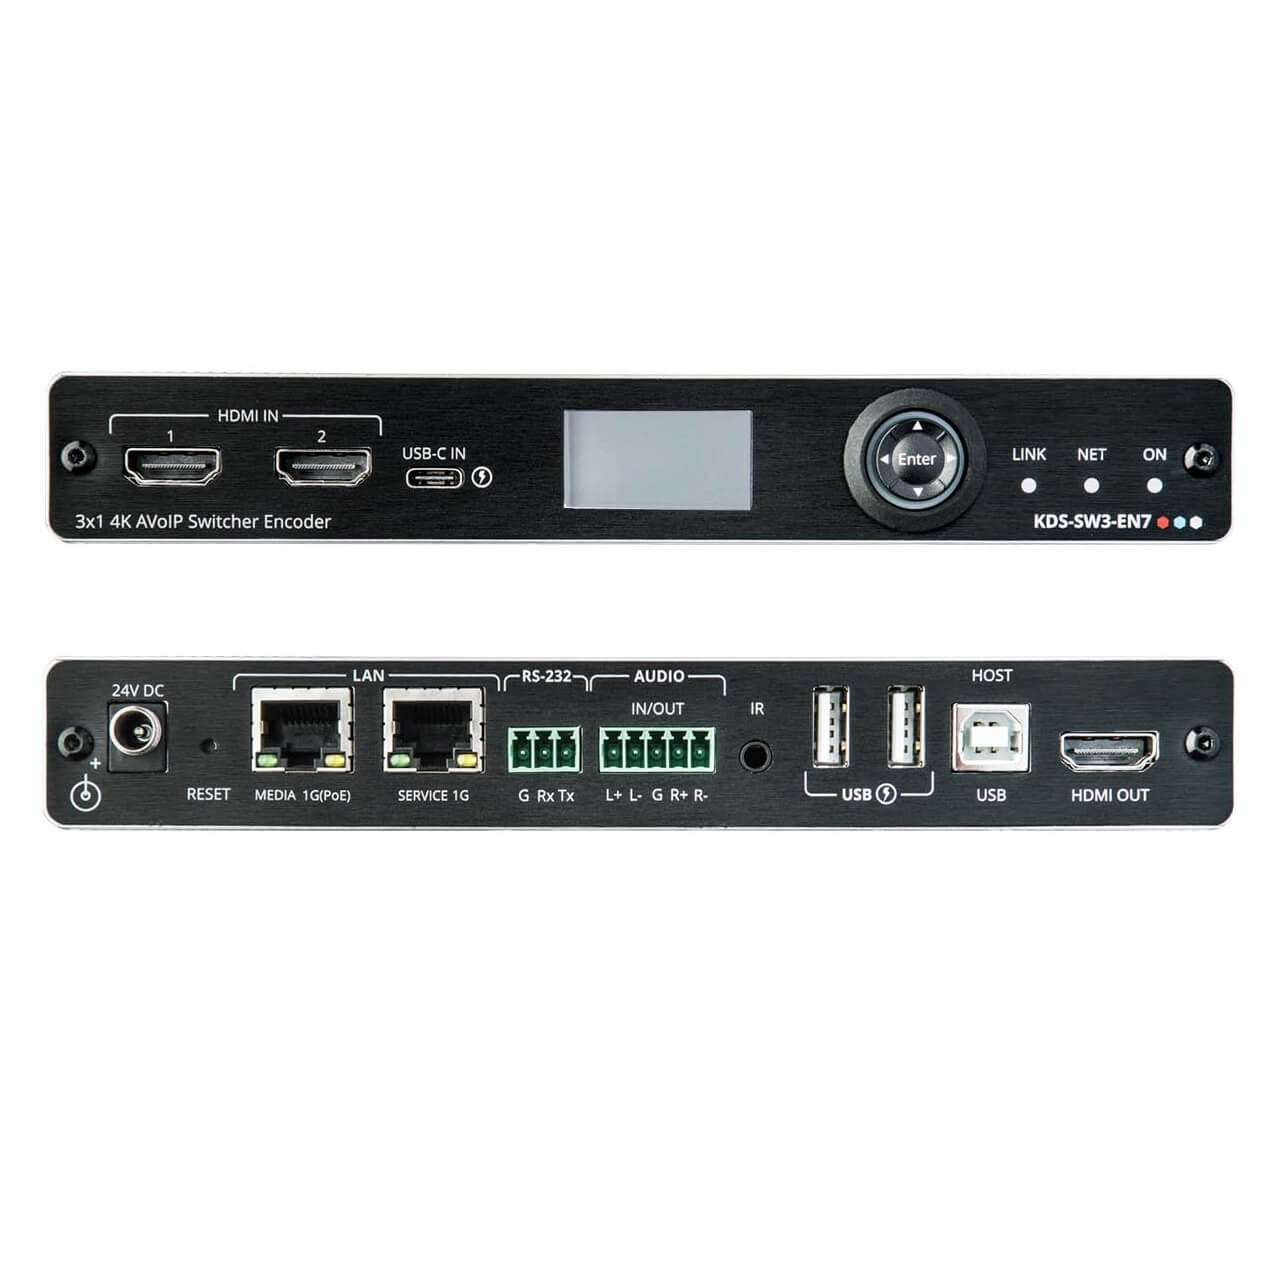 Kramer KDS-SW3-EN7 - 4K AVoIP Auto–switching Encoder with Dante, front and rear combined views